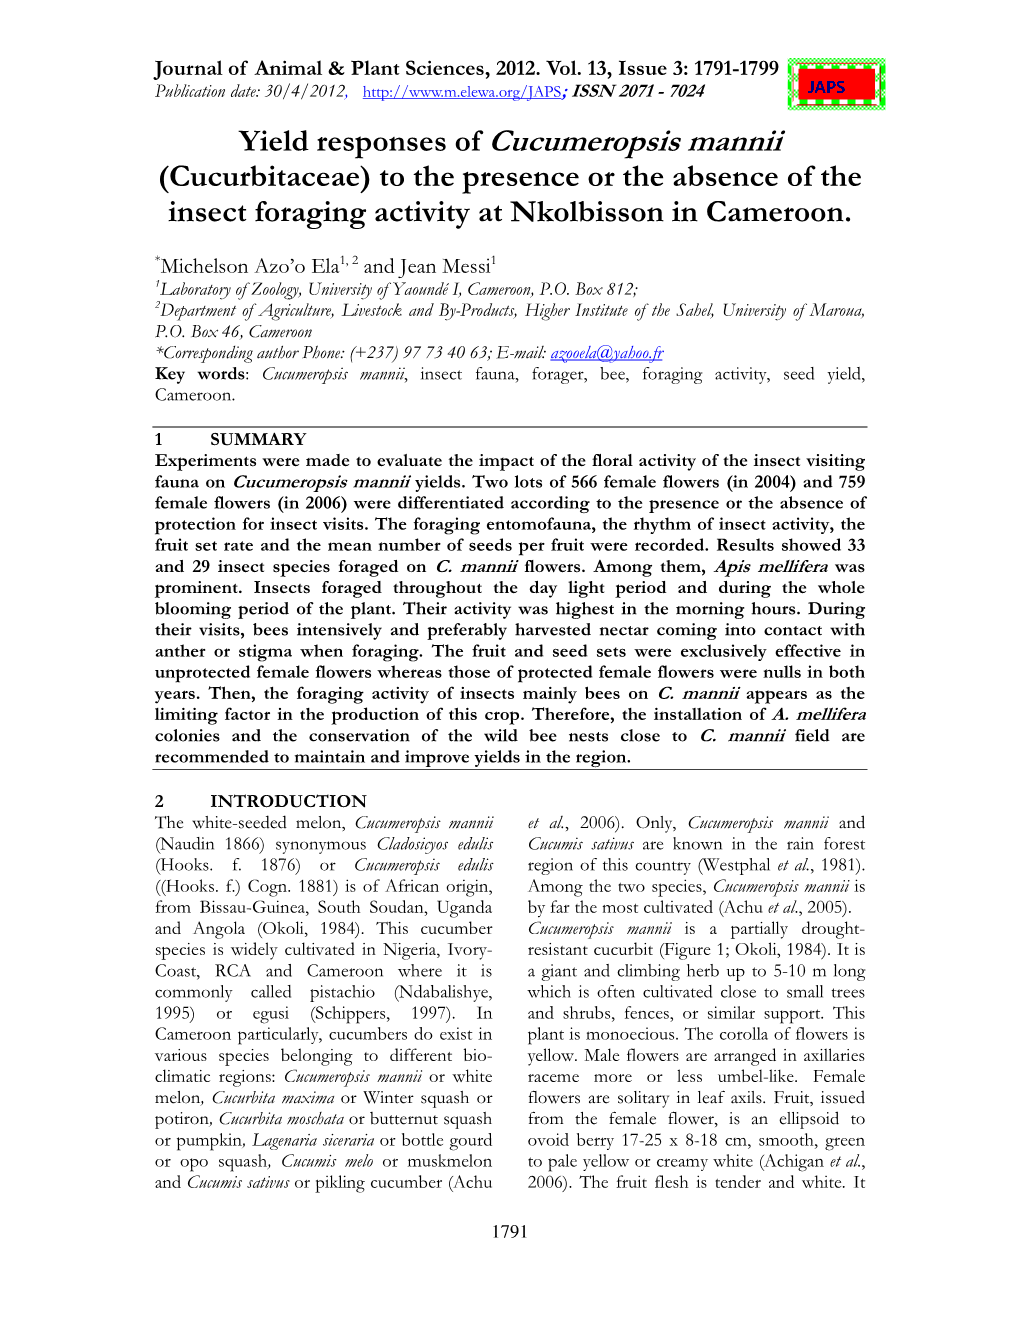 Yield Responses of Cucumeropsis Mannii (Cucurbitaceae) to the Presence Or the Absence of the Insect Foraging Activity at Nkolbisson in Cameroon